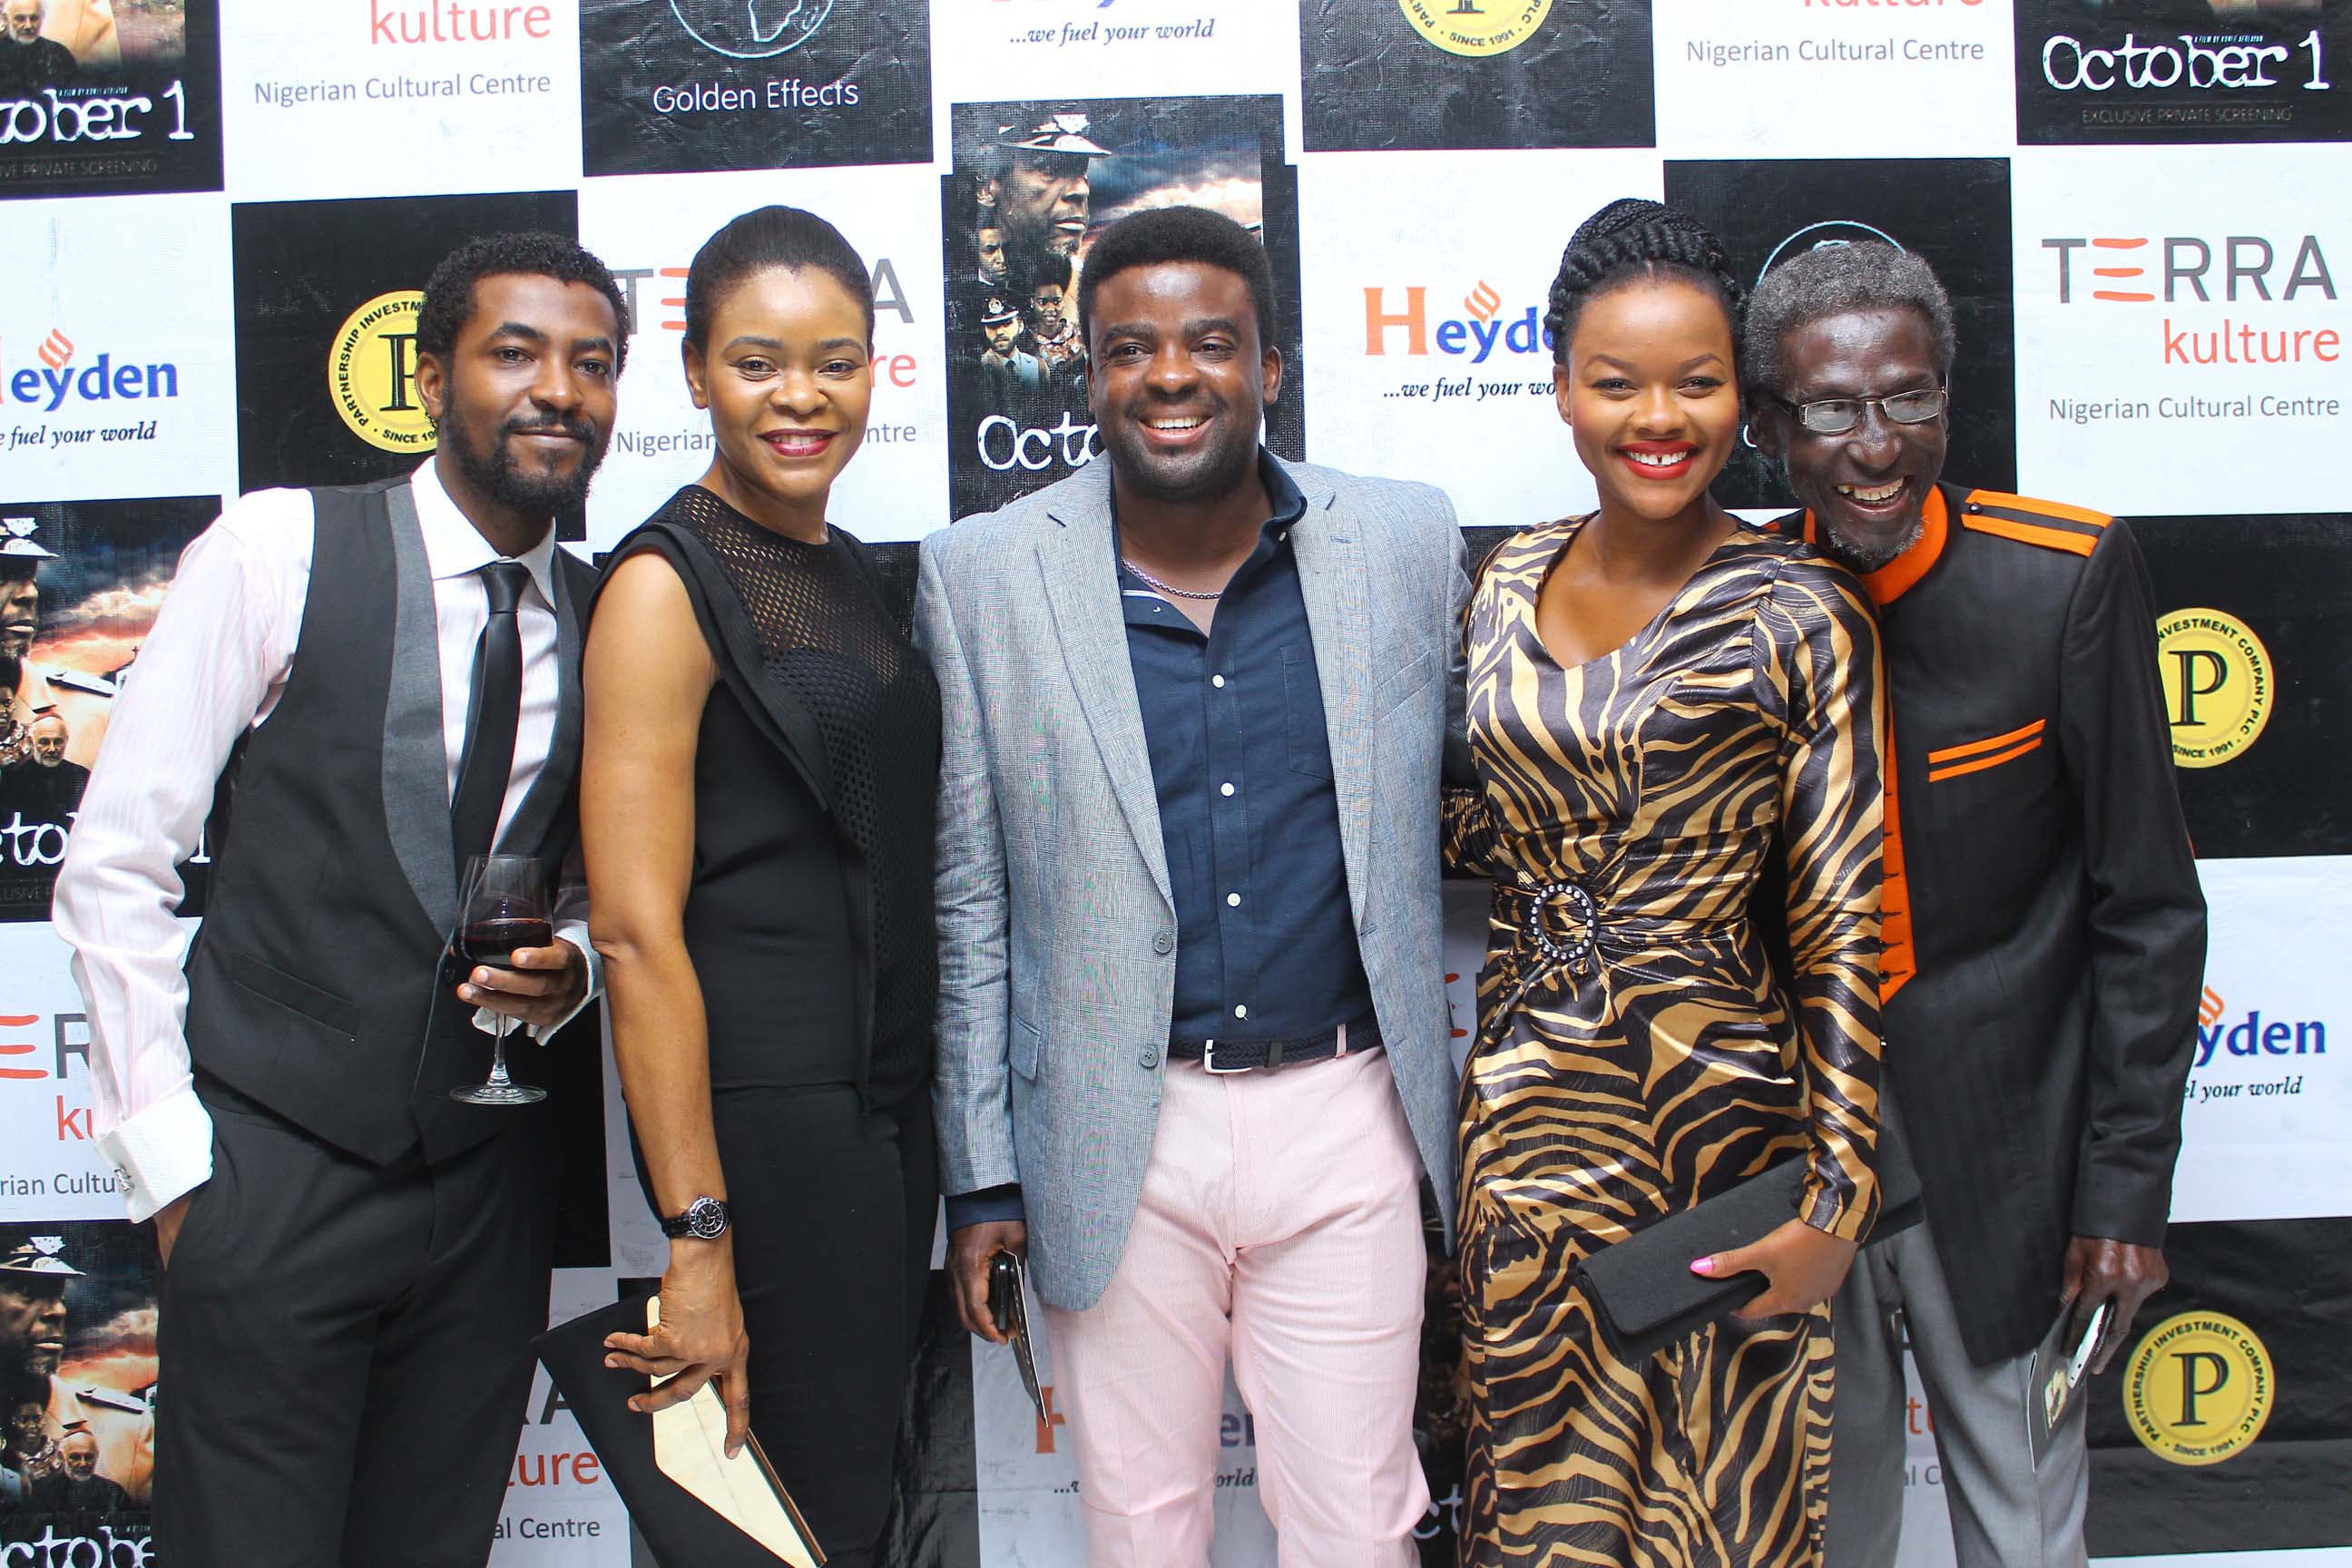 Sadiq Daba, RMD, Mo Abudu, Others Attend Private Screening Of October 1